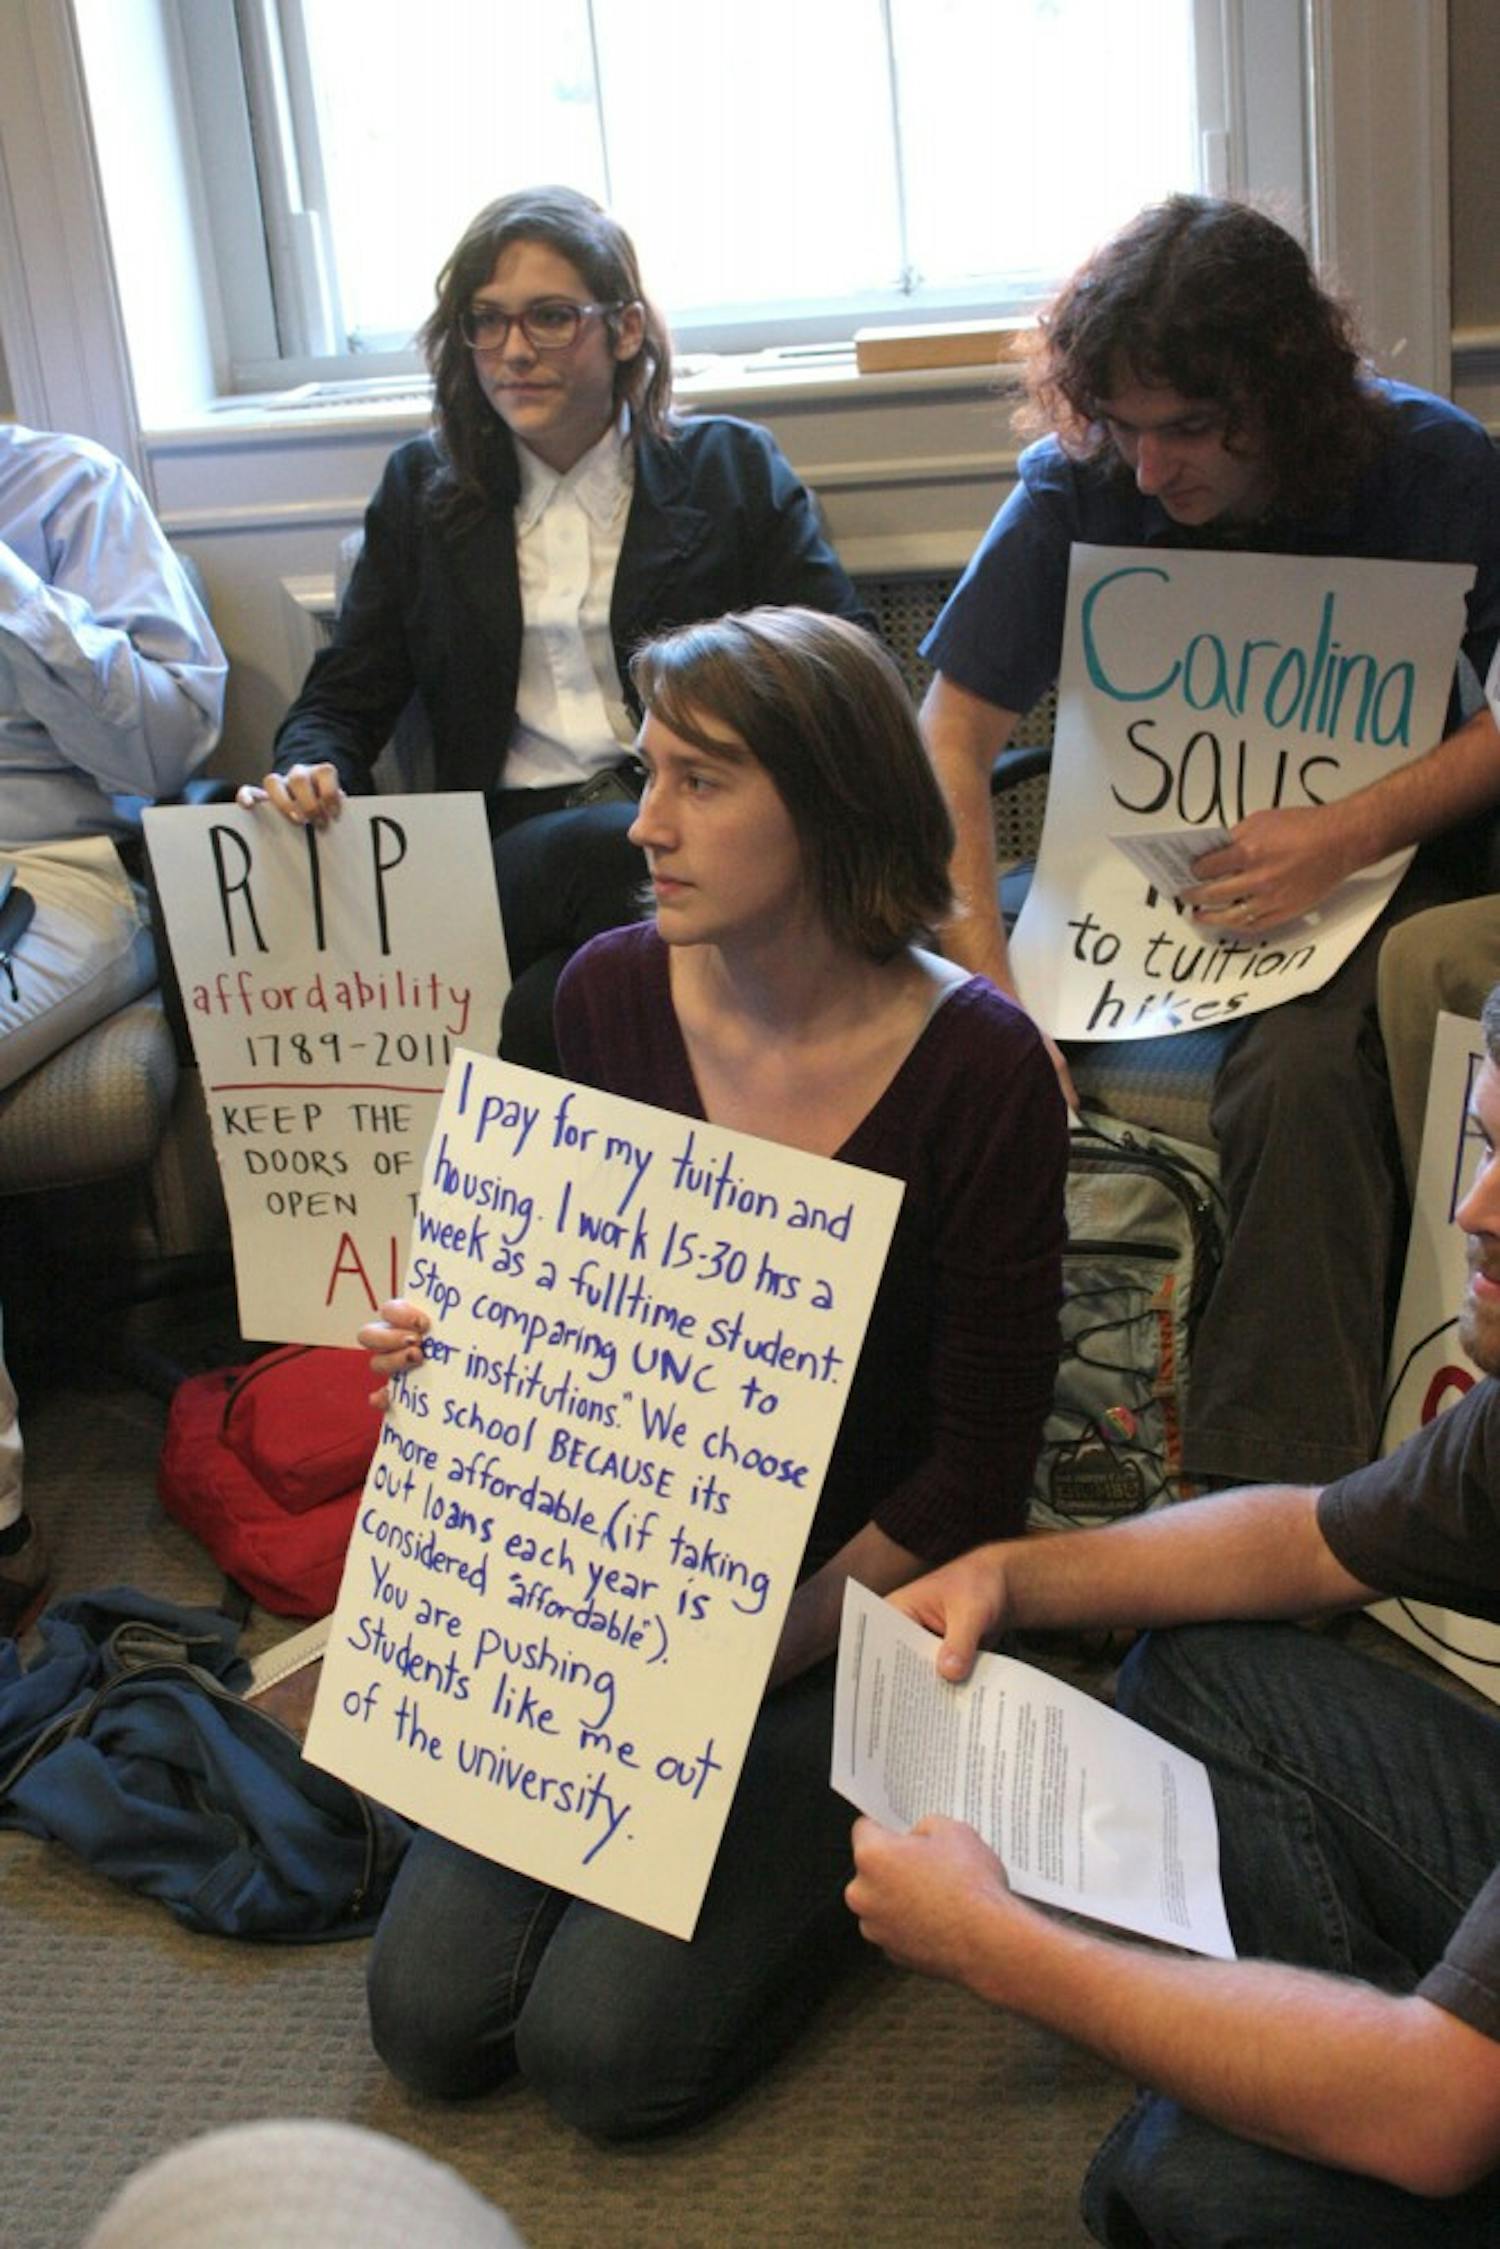 Photo: UNC administration approves tuition plan, leaves many dissatisfied (Nicole Comparato)